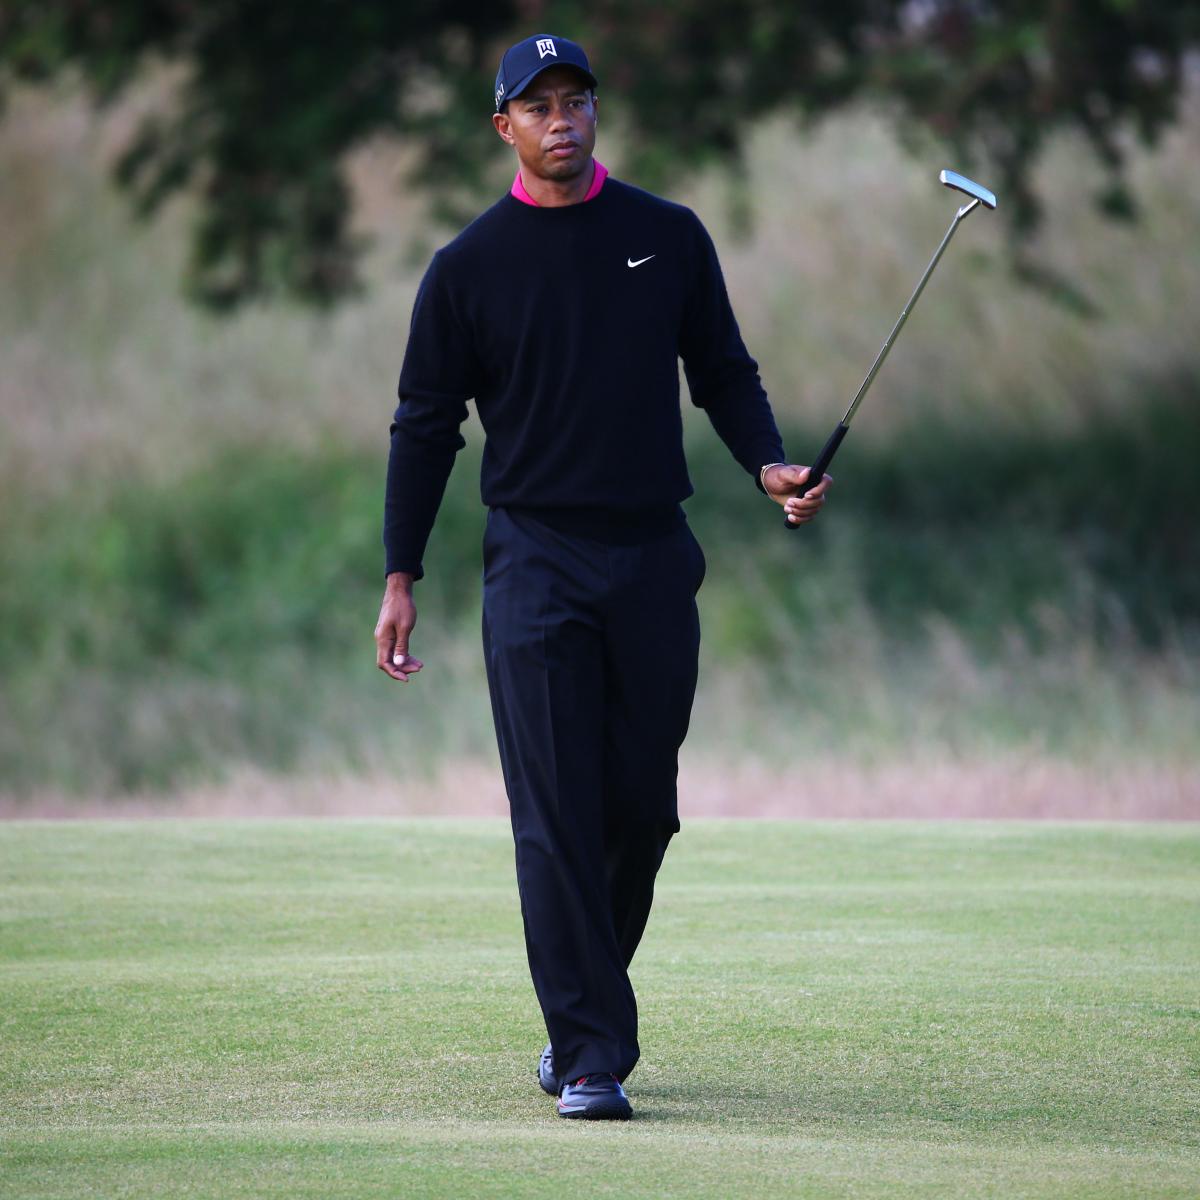 Tiger Woods Must Win 2013 British Open to Silence Doubters | News ...